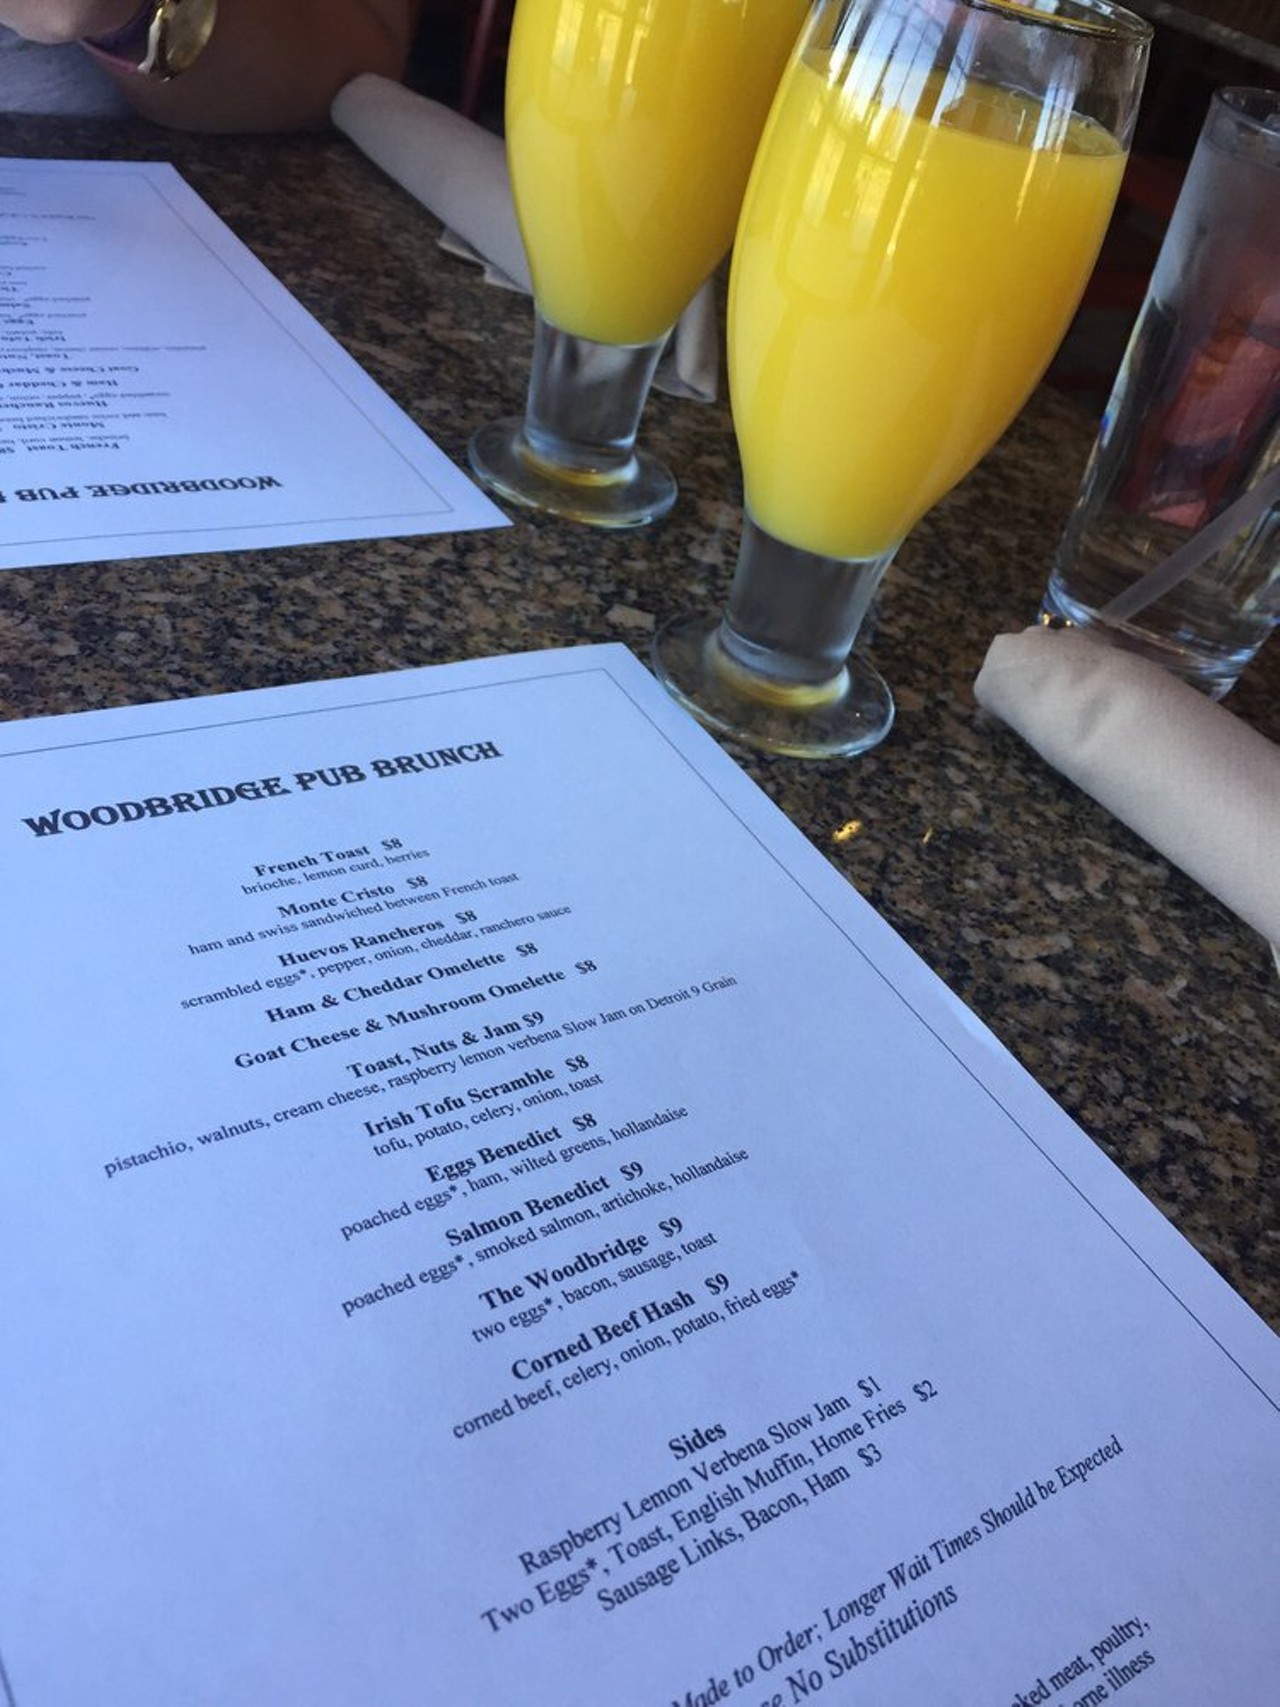 Woodbridge Pub
Detroit, MI
The pub in Detroit serves burgers, sandwiches and soups, and you can snag bottomless mimosas during Sunday brunch from 11am-3pm for $11. 
Photo via Facebook: Erin M.